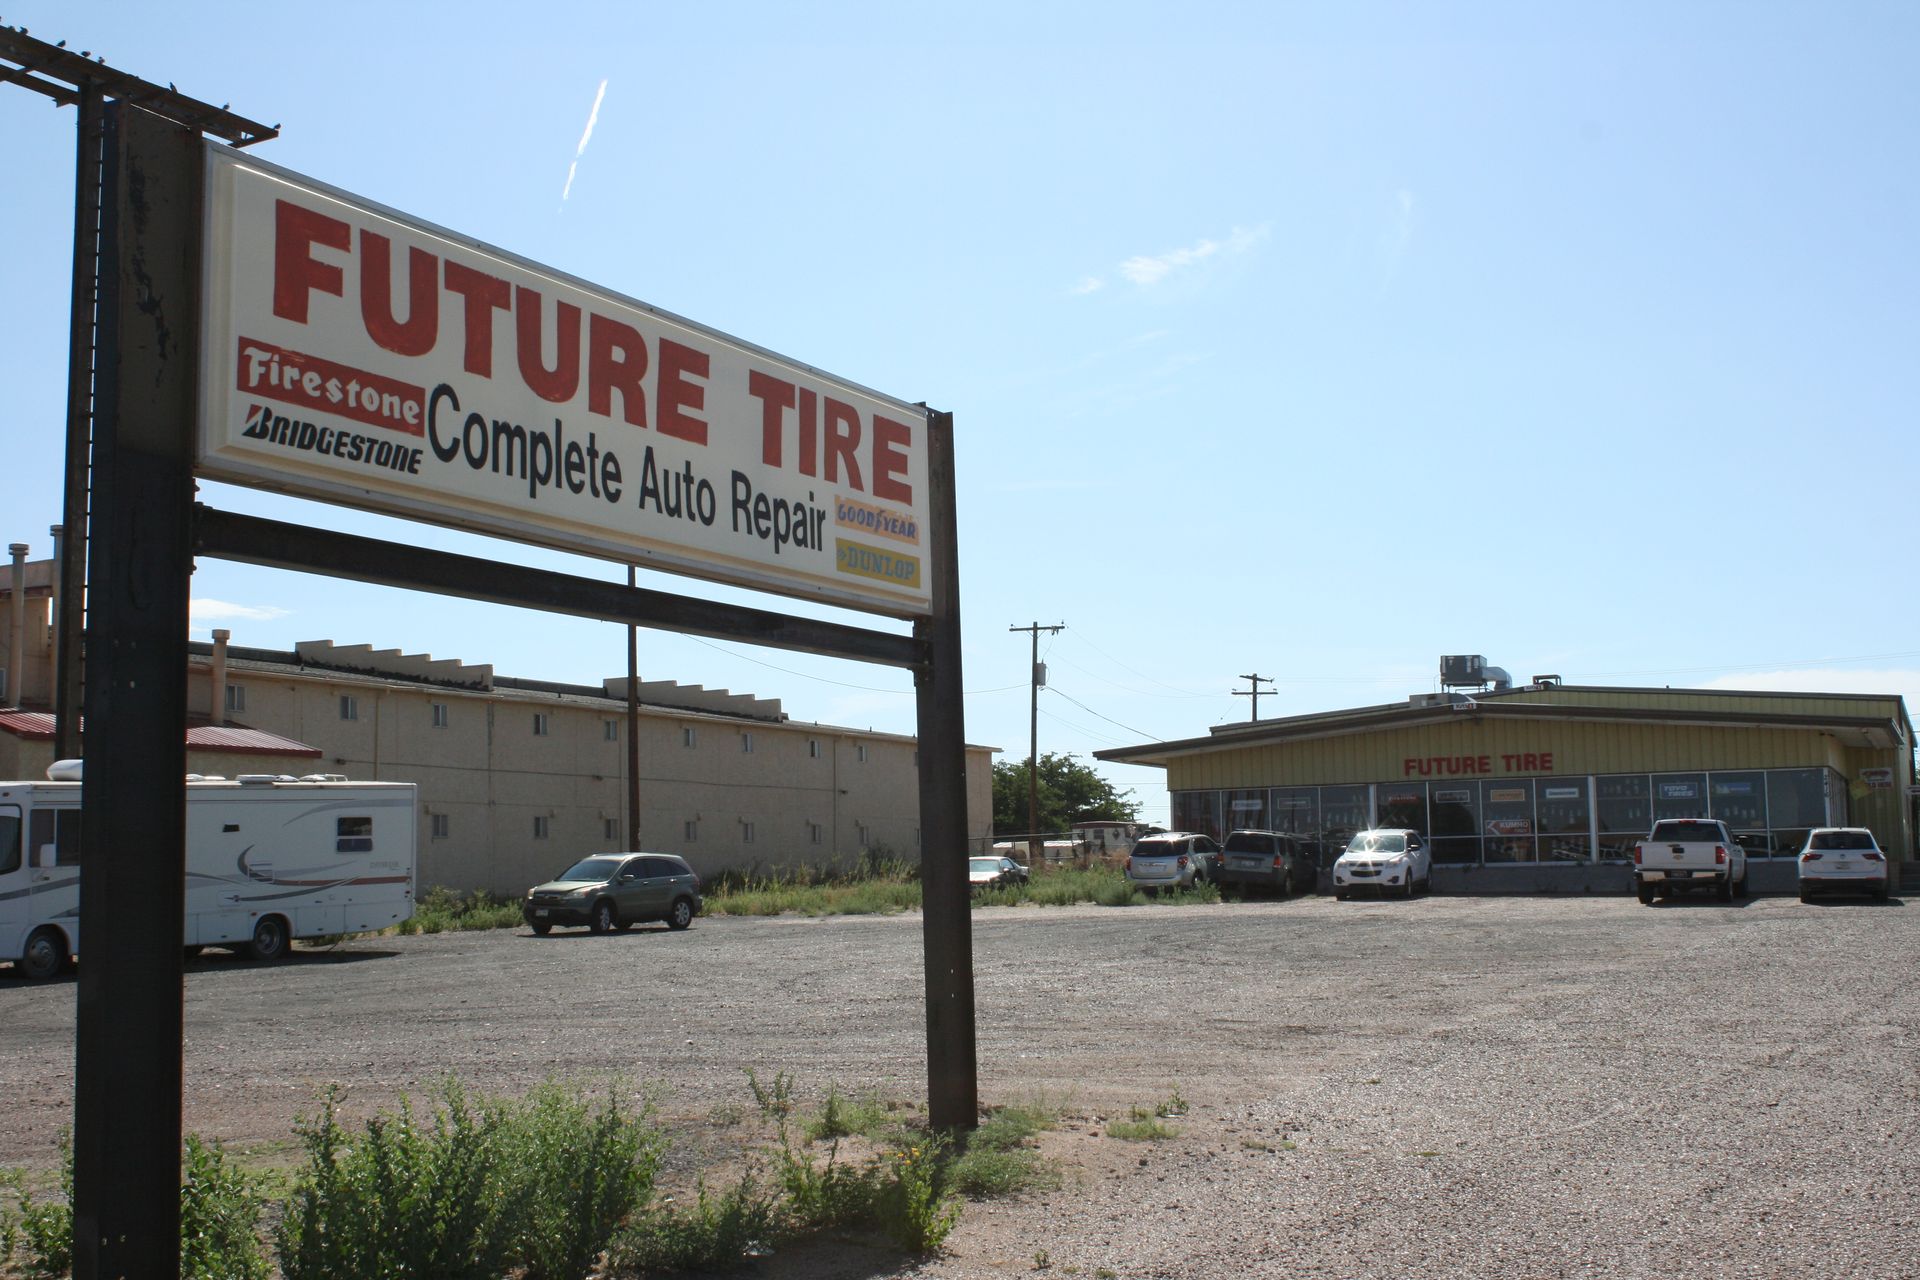 A sign for future tire complete auto repair